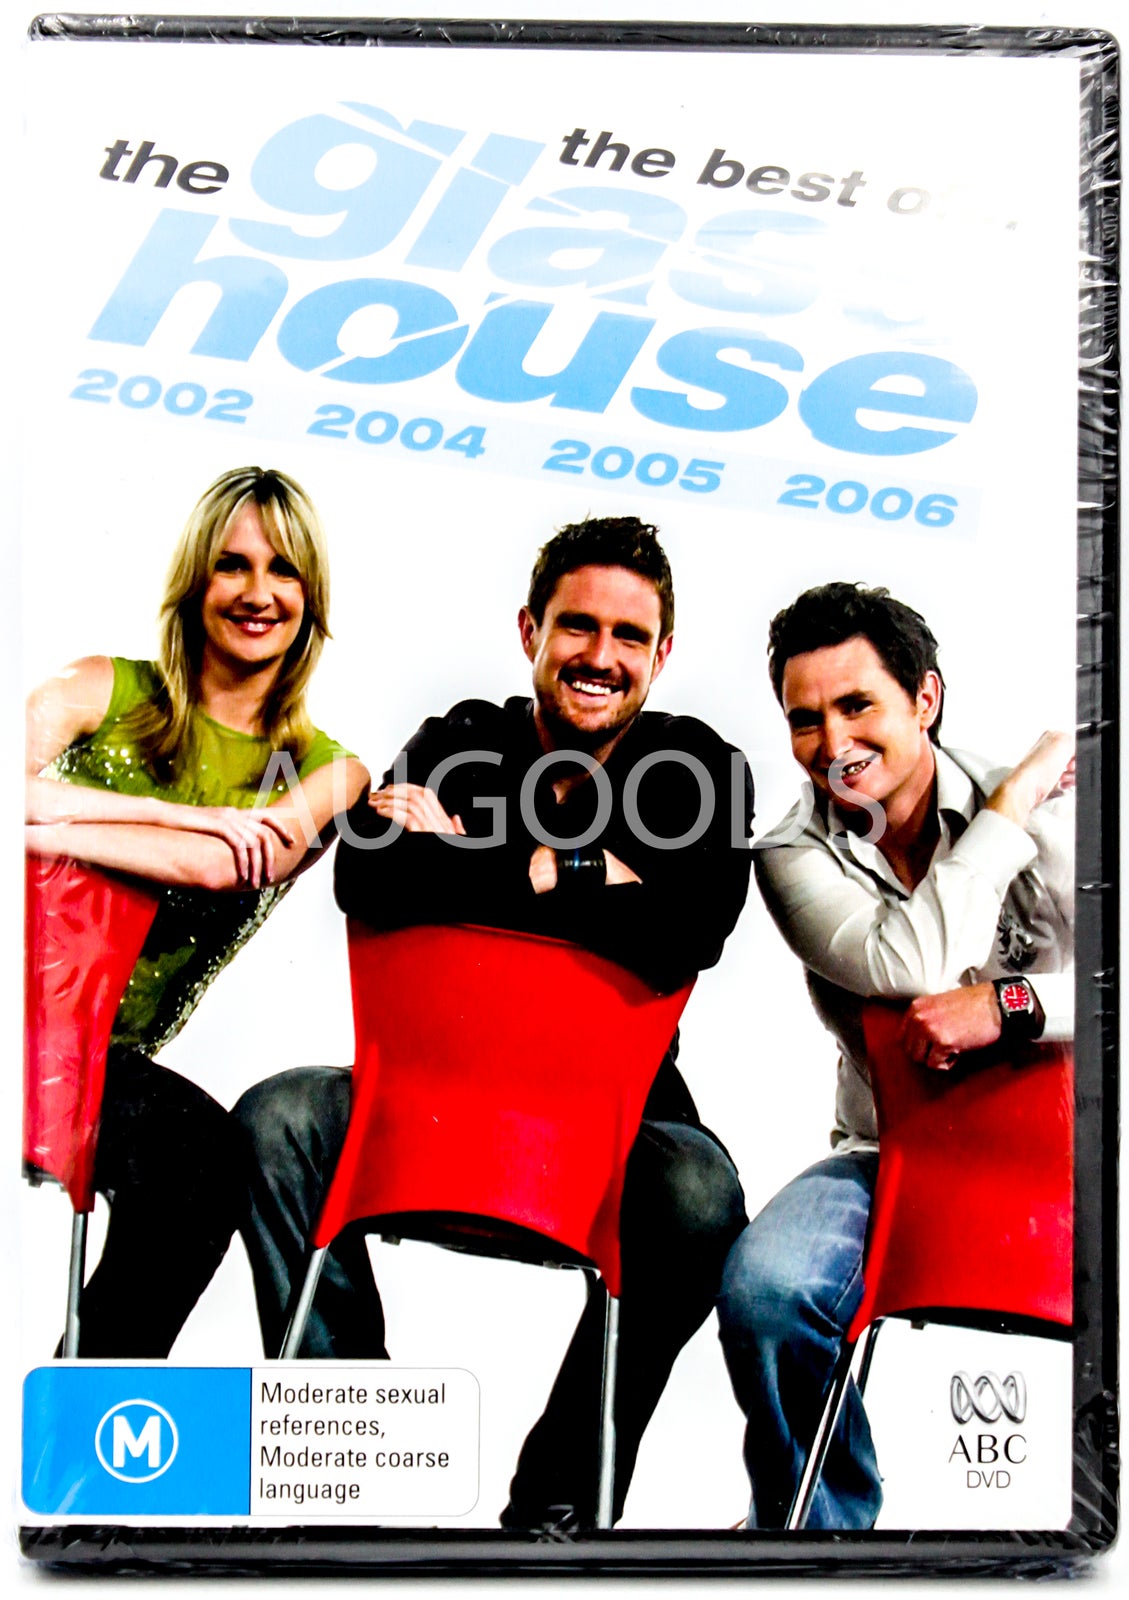 The Best of the Glass House - 2002,2004,2005,2006 -DVD -Comedy Preowned: Excellent Condition